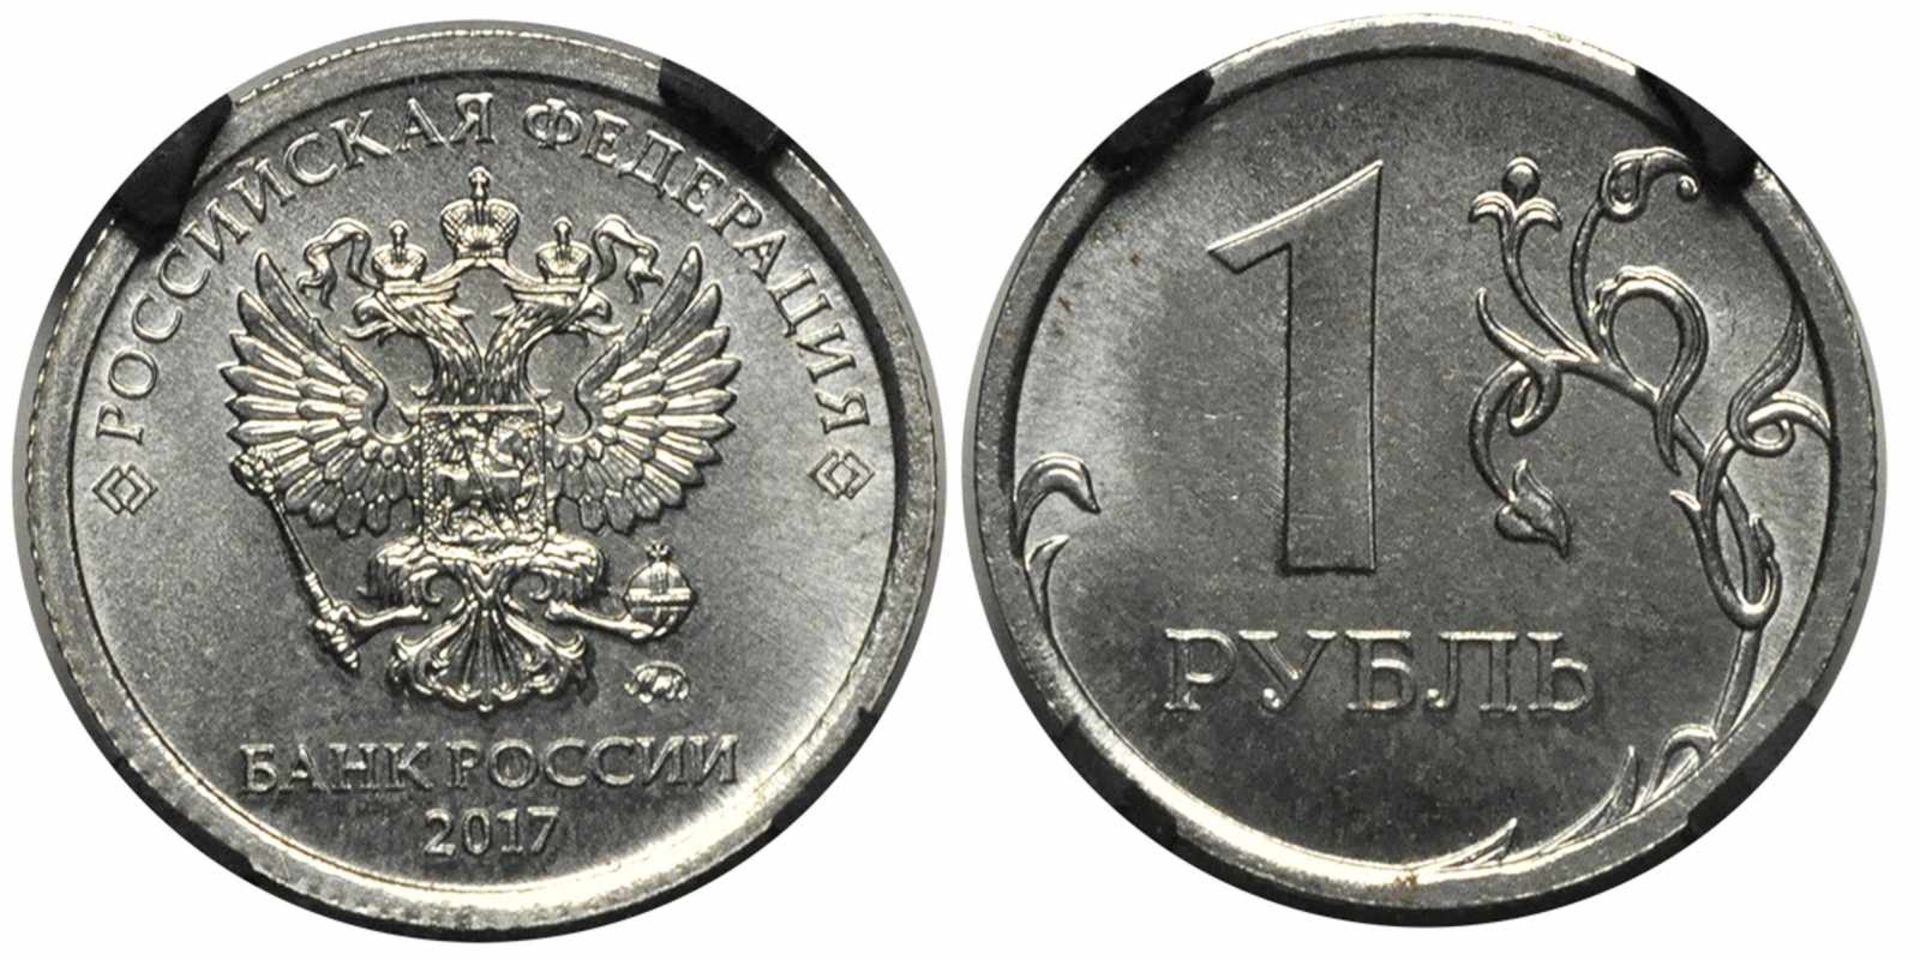 25 rubles 2017. MMD. Defect. MS66. RNGA.25 rubles 2017. MMD. Defect: minted on double breadth